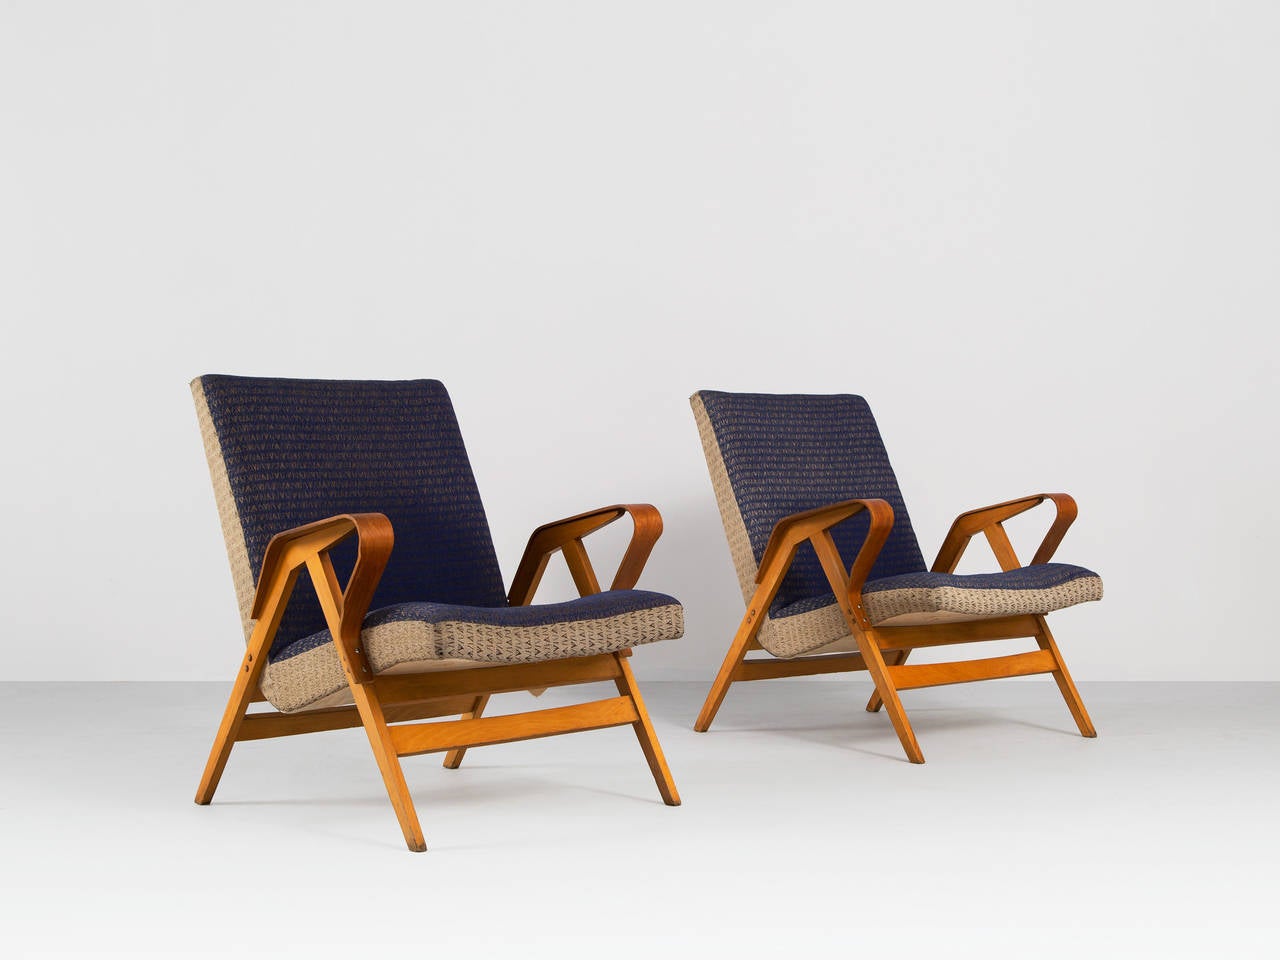 Early 1950s plywood lounge chairs. The chairs show modern shapes and elegant curves in the armrest. The seats float in between the legs and are covered in their original upholstery.

Please note that the fabric shows some signs of wear and use,